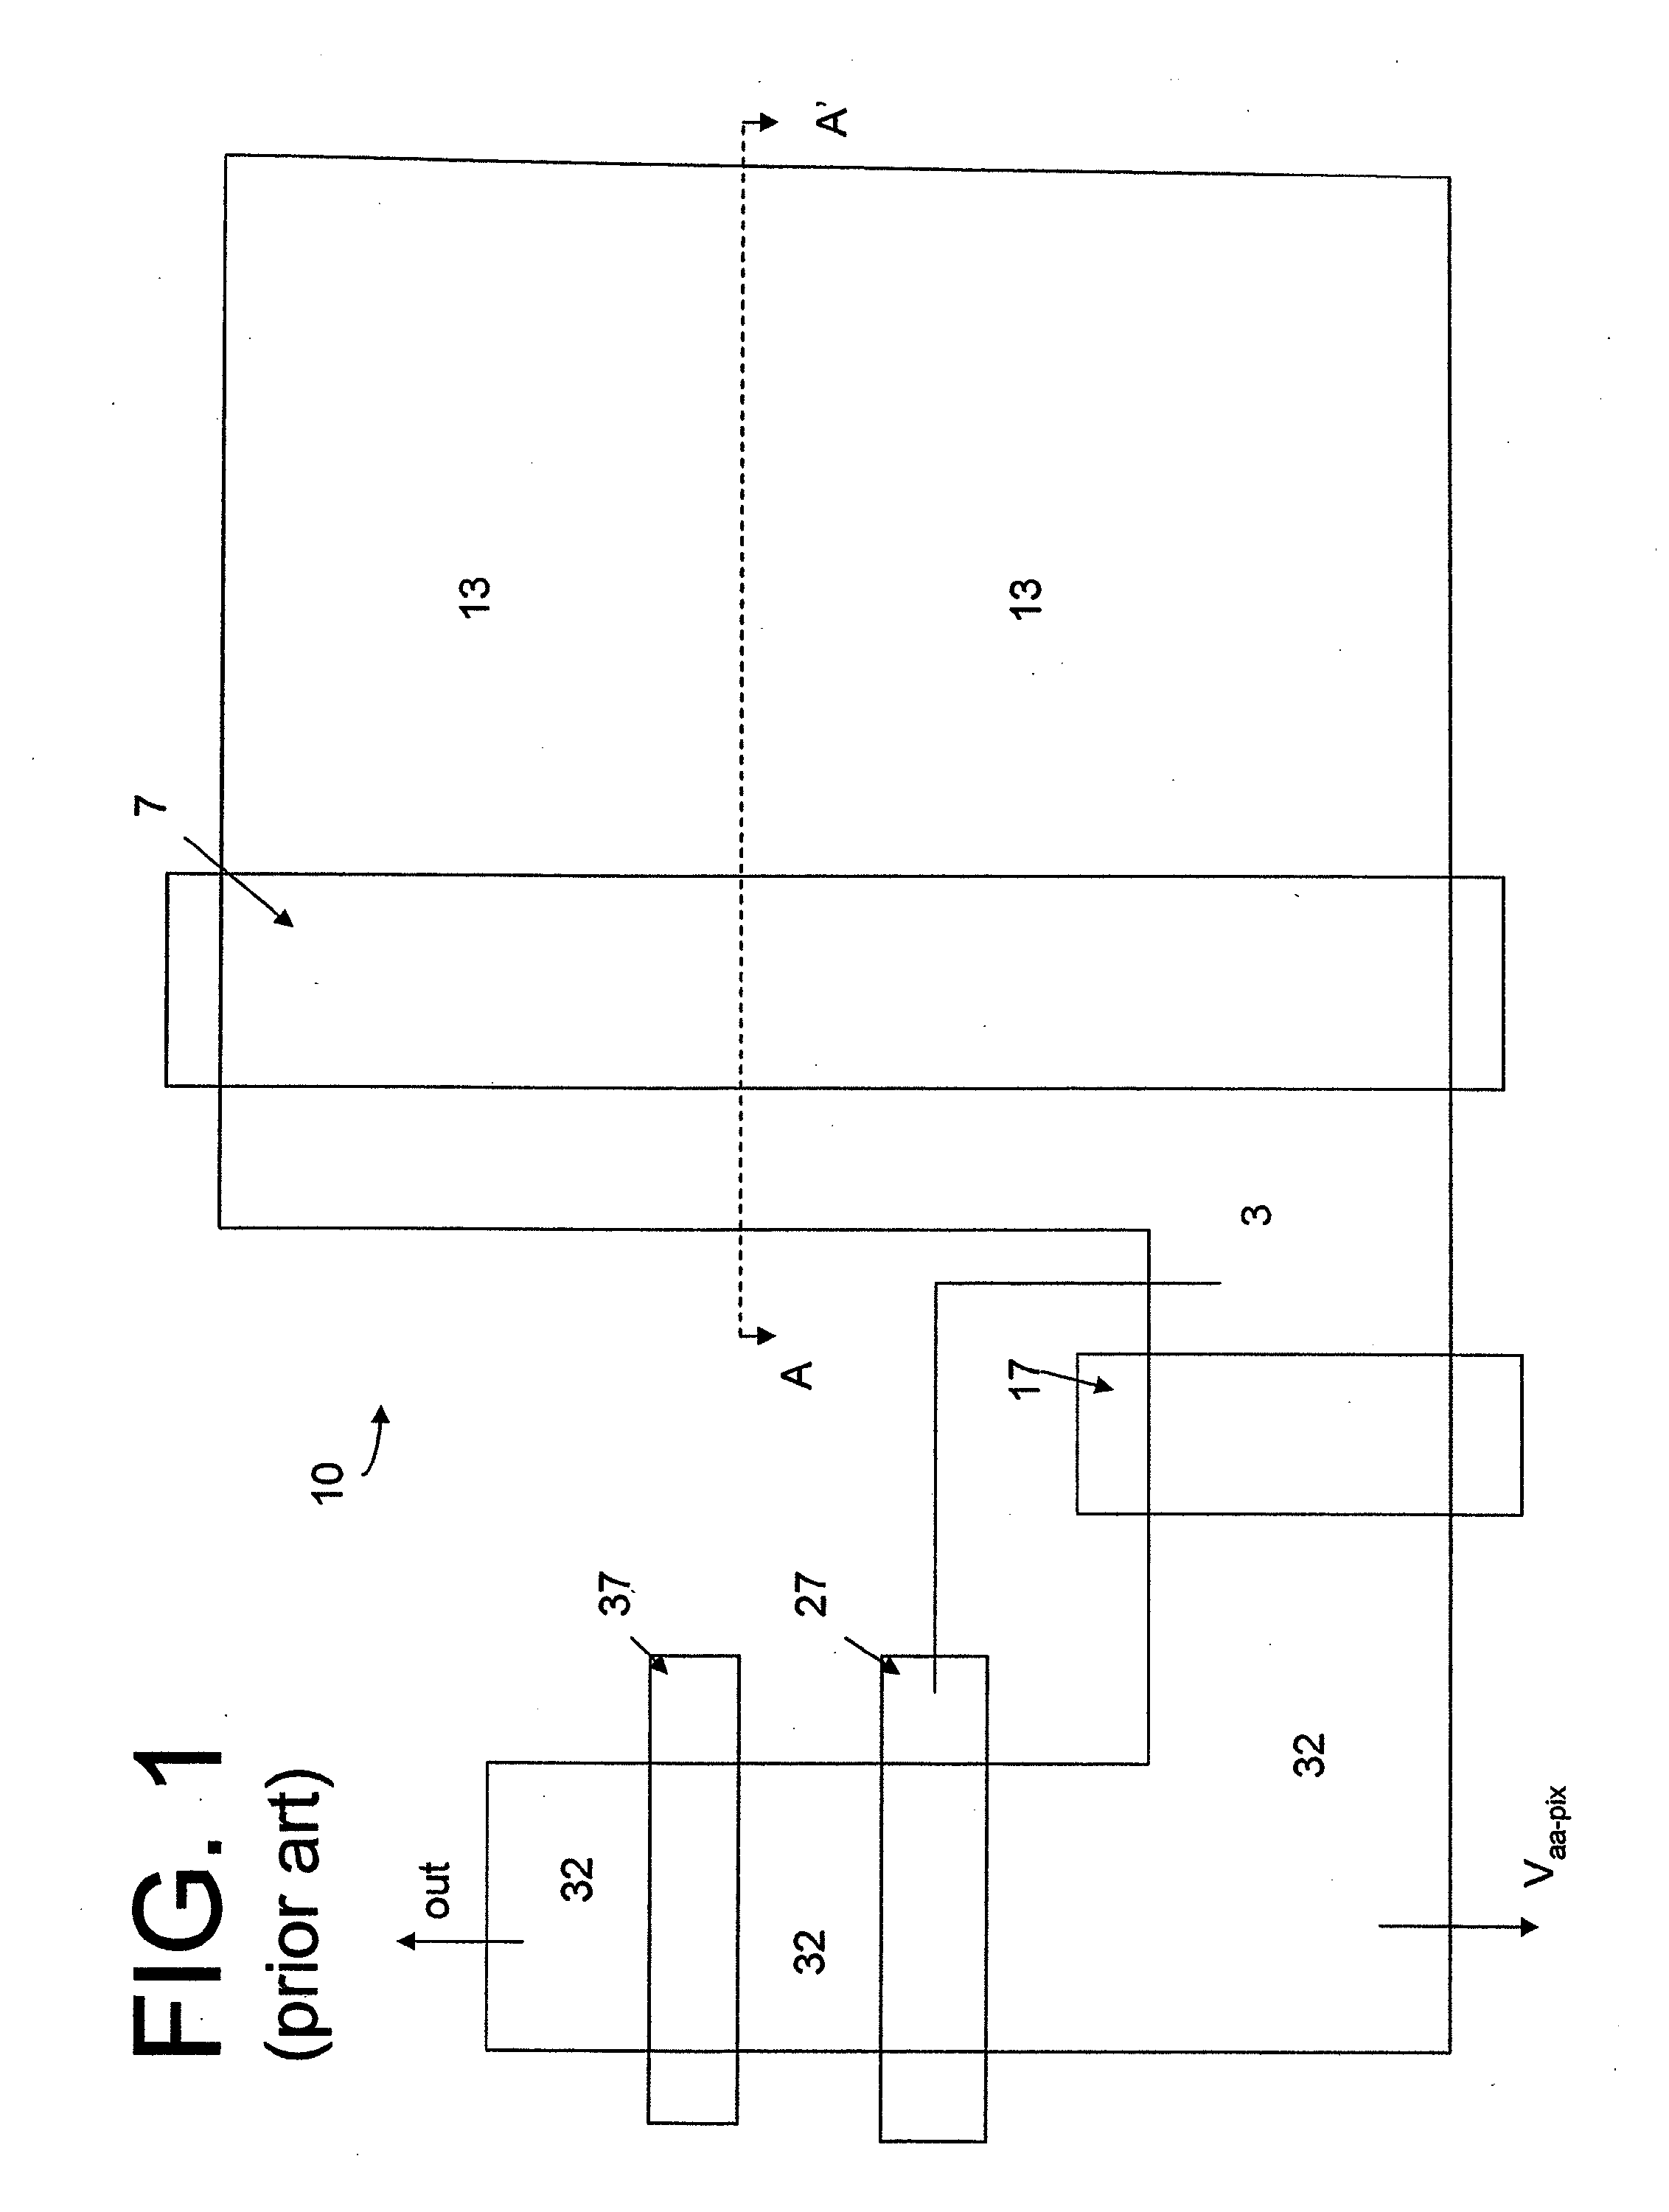 Transparent Conductor Based Pinned Photodiode